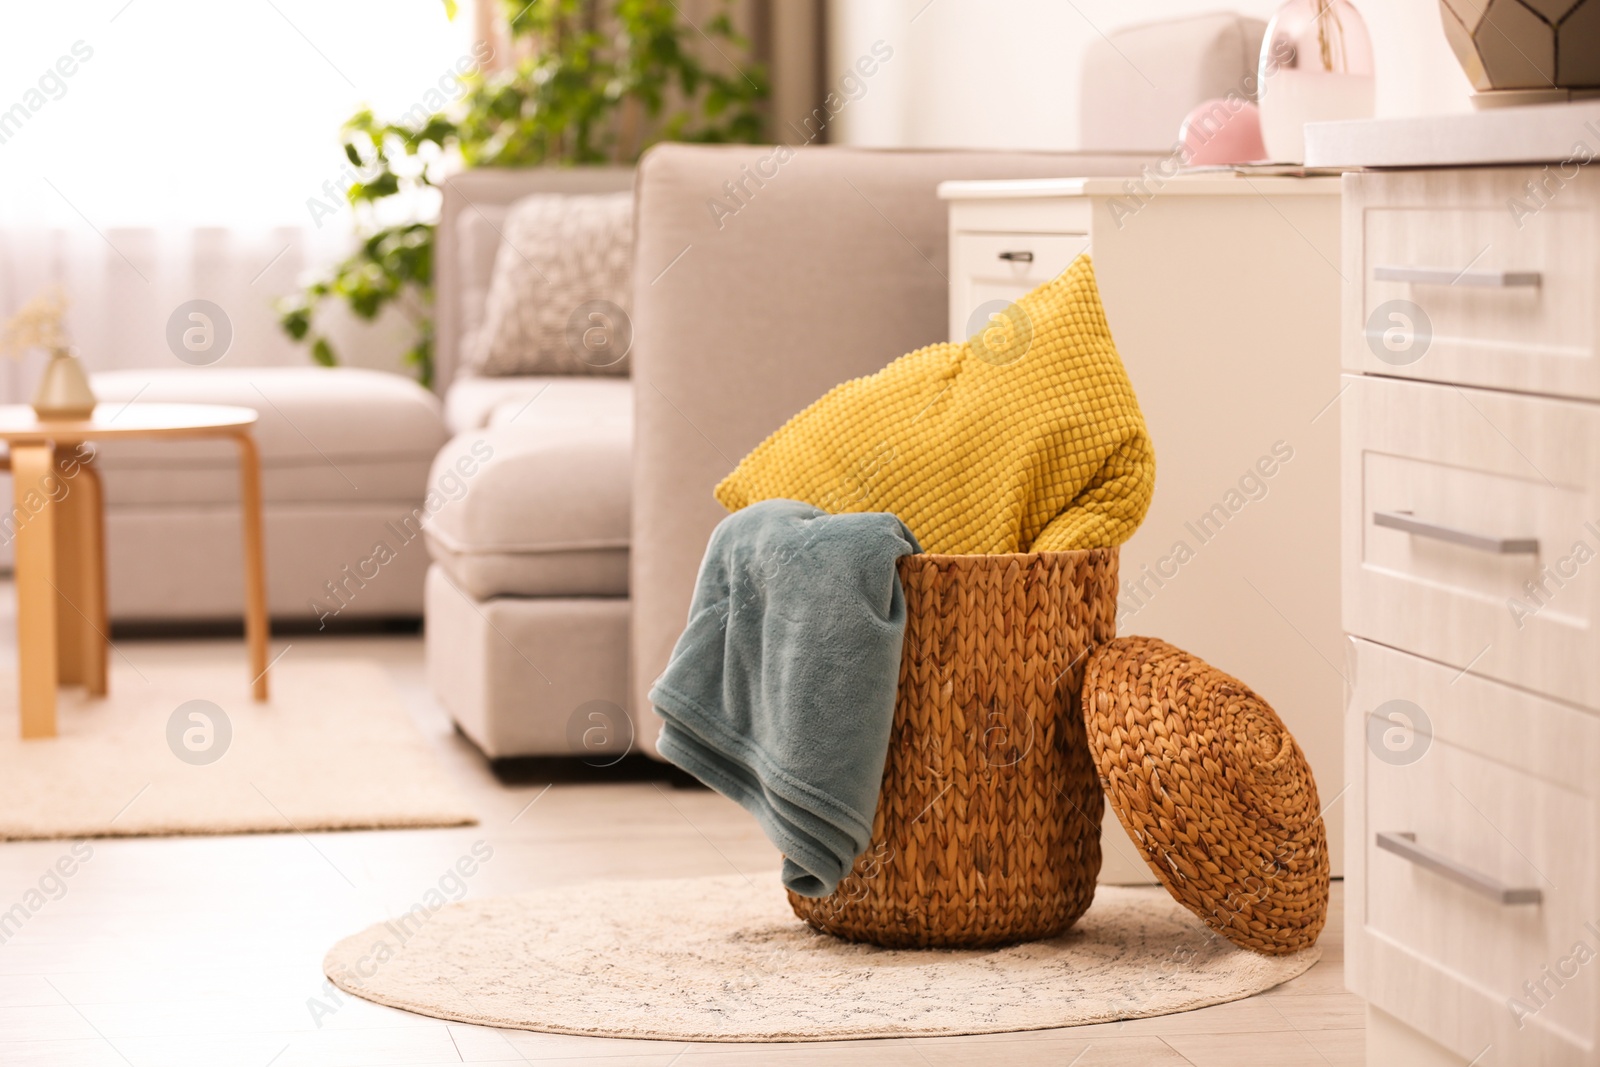 Photo of Basket with blanket and pillow in light room